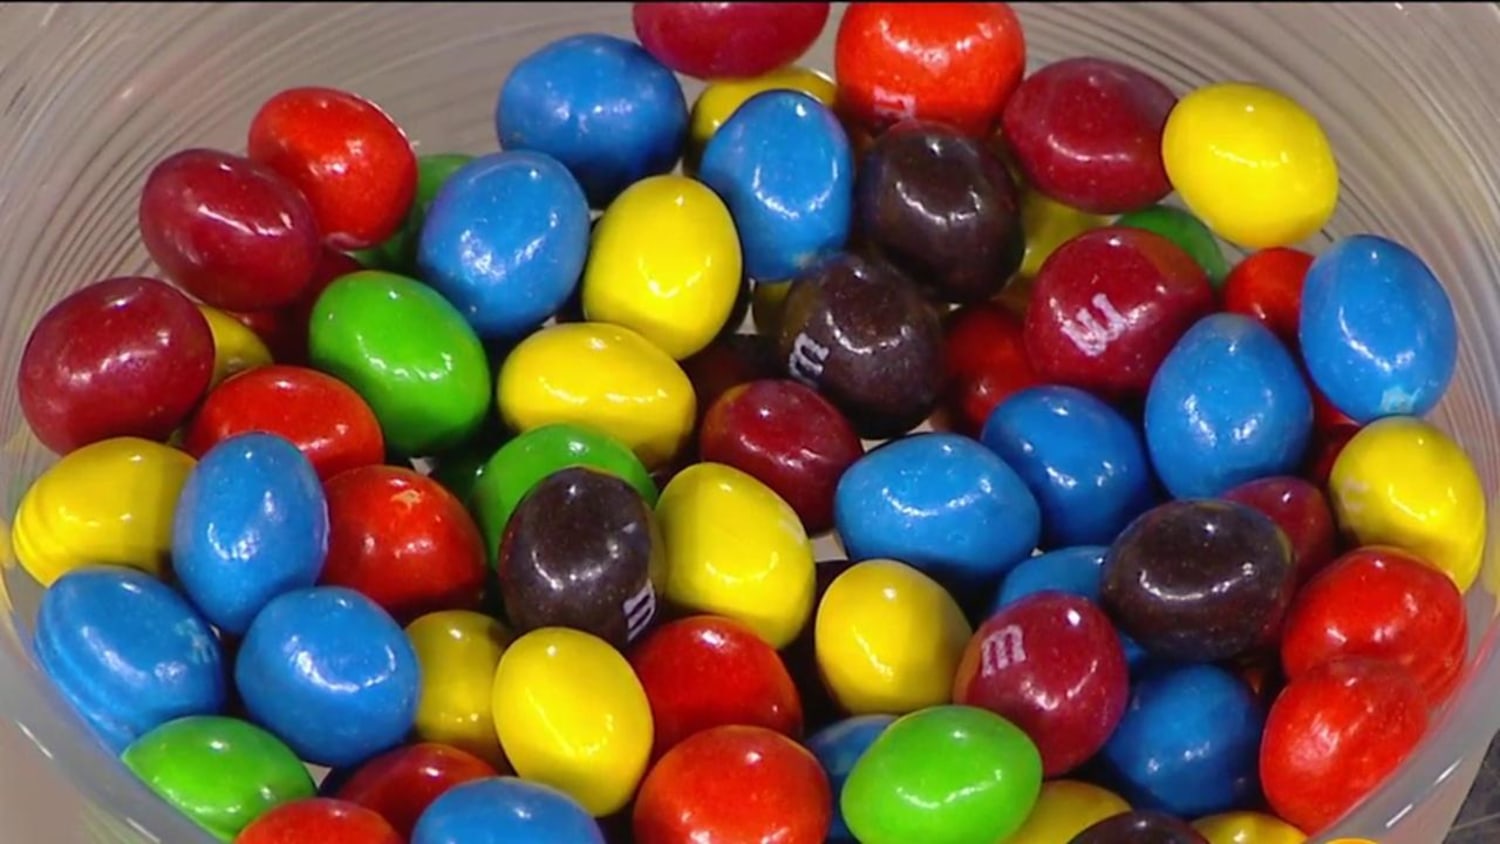 Hazelnut Spread M&M's That Taste Like Nutella Are Hitting Stores Next Month